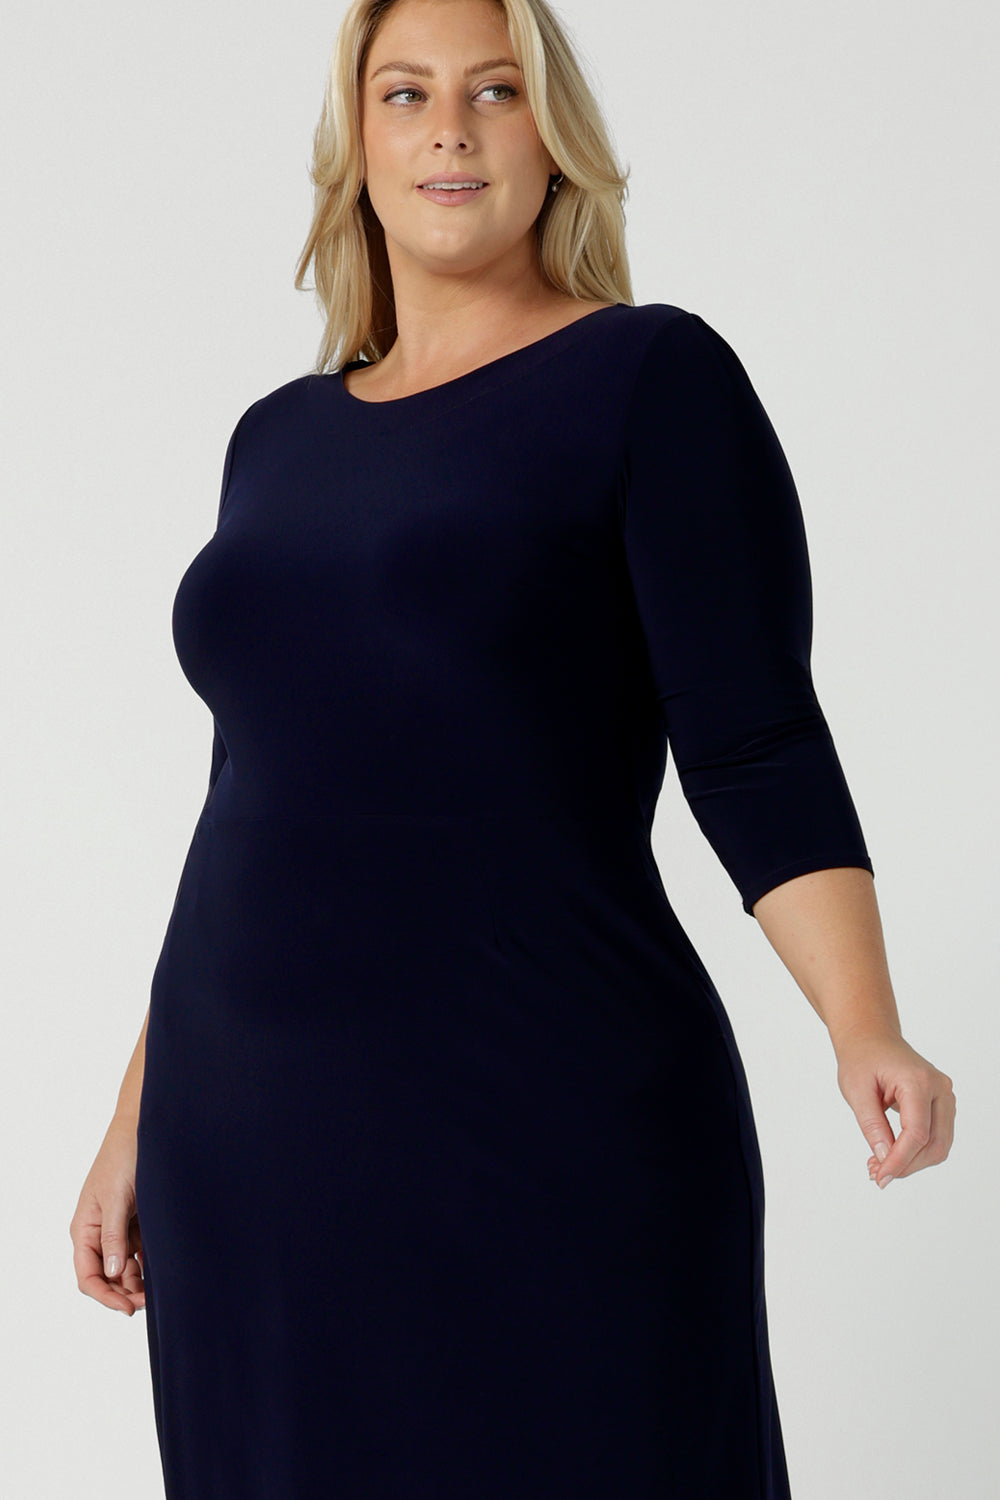 A size 18 woman wears the Audrey Shift Dress in Navy is the perfect all season shift dress. Soft jersey fabric, 3/4 sleeves and pockets. Made in Australia for women size 8 - 24.